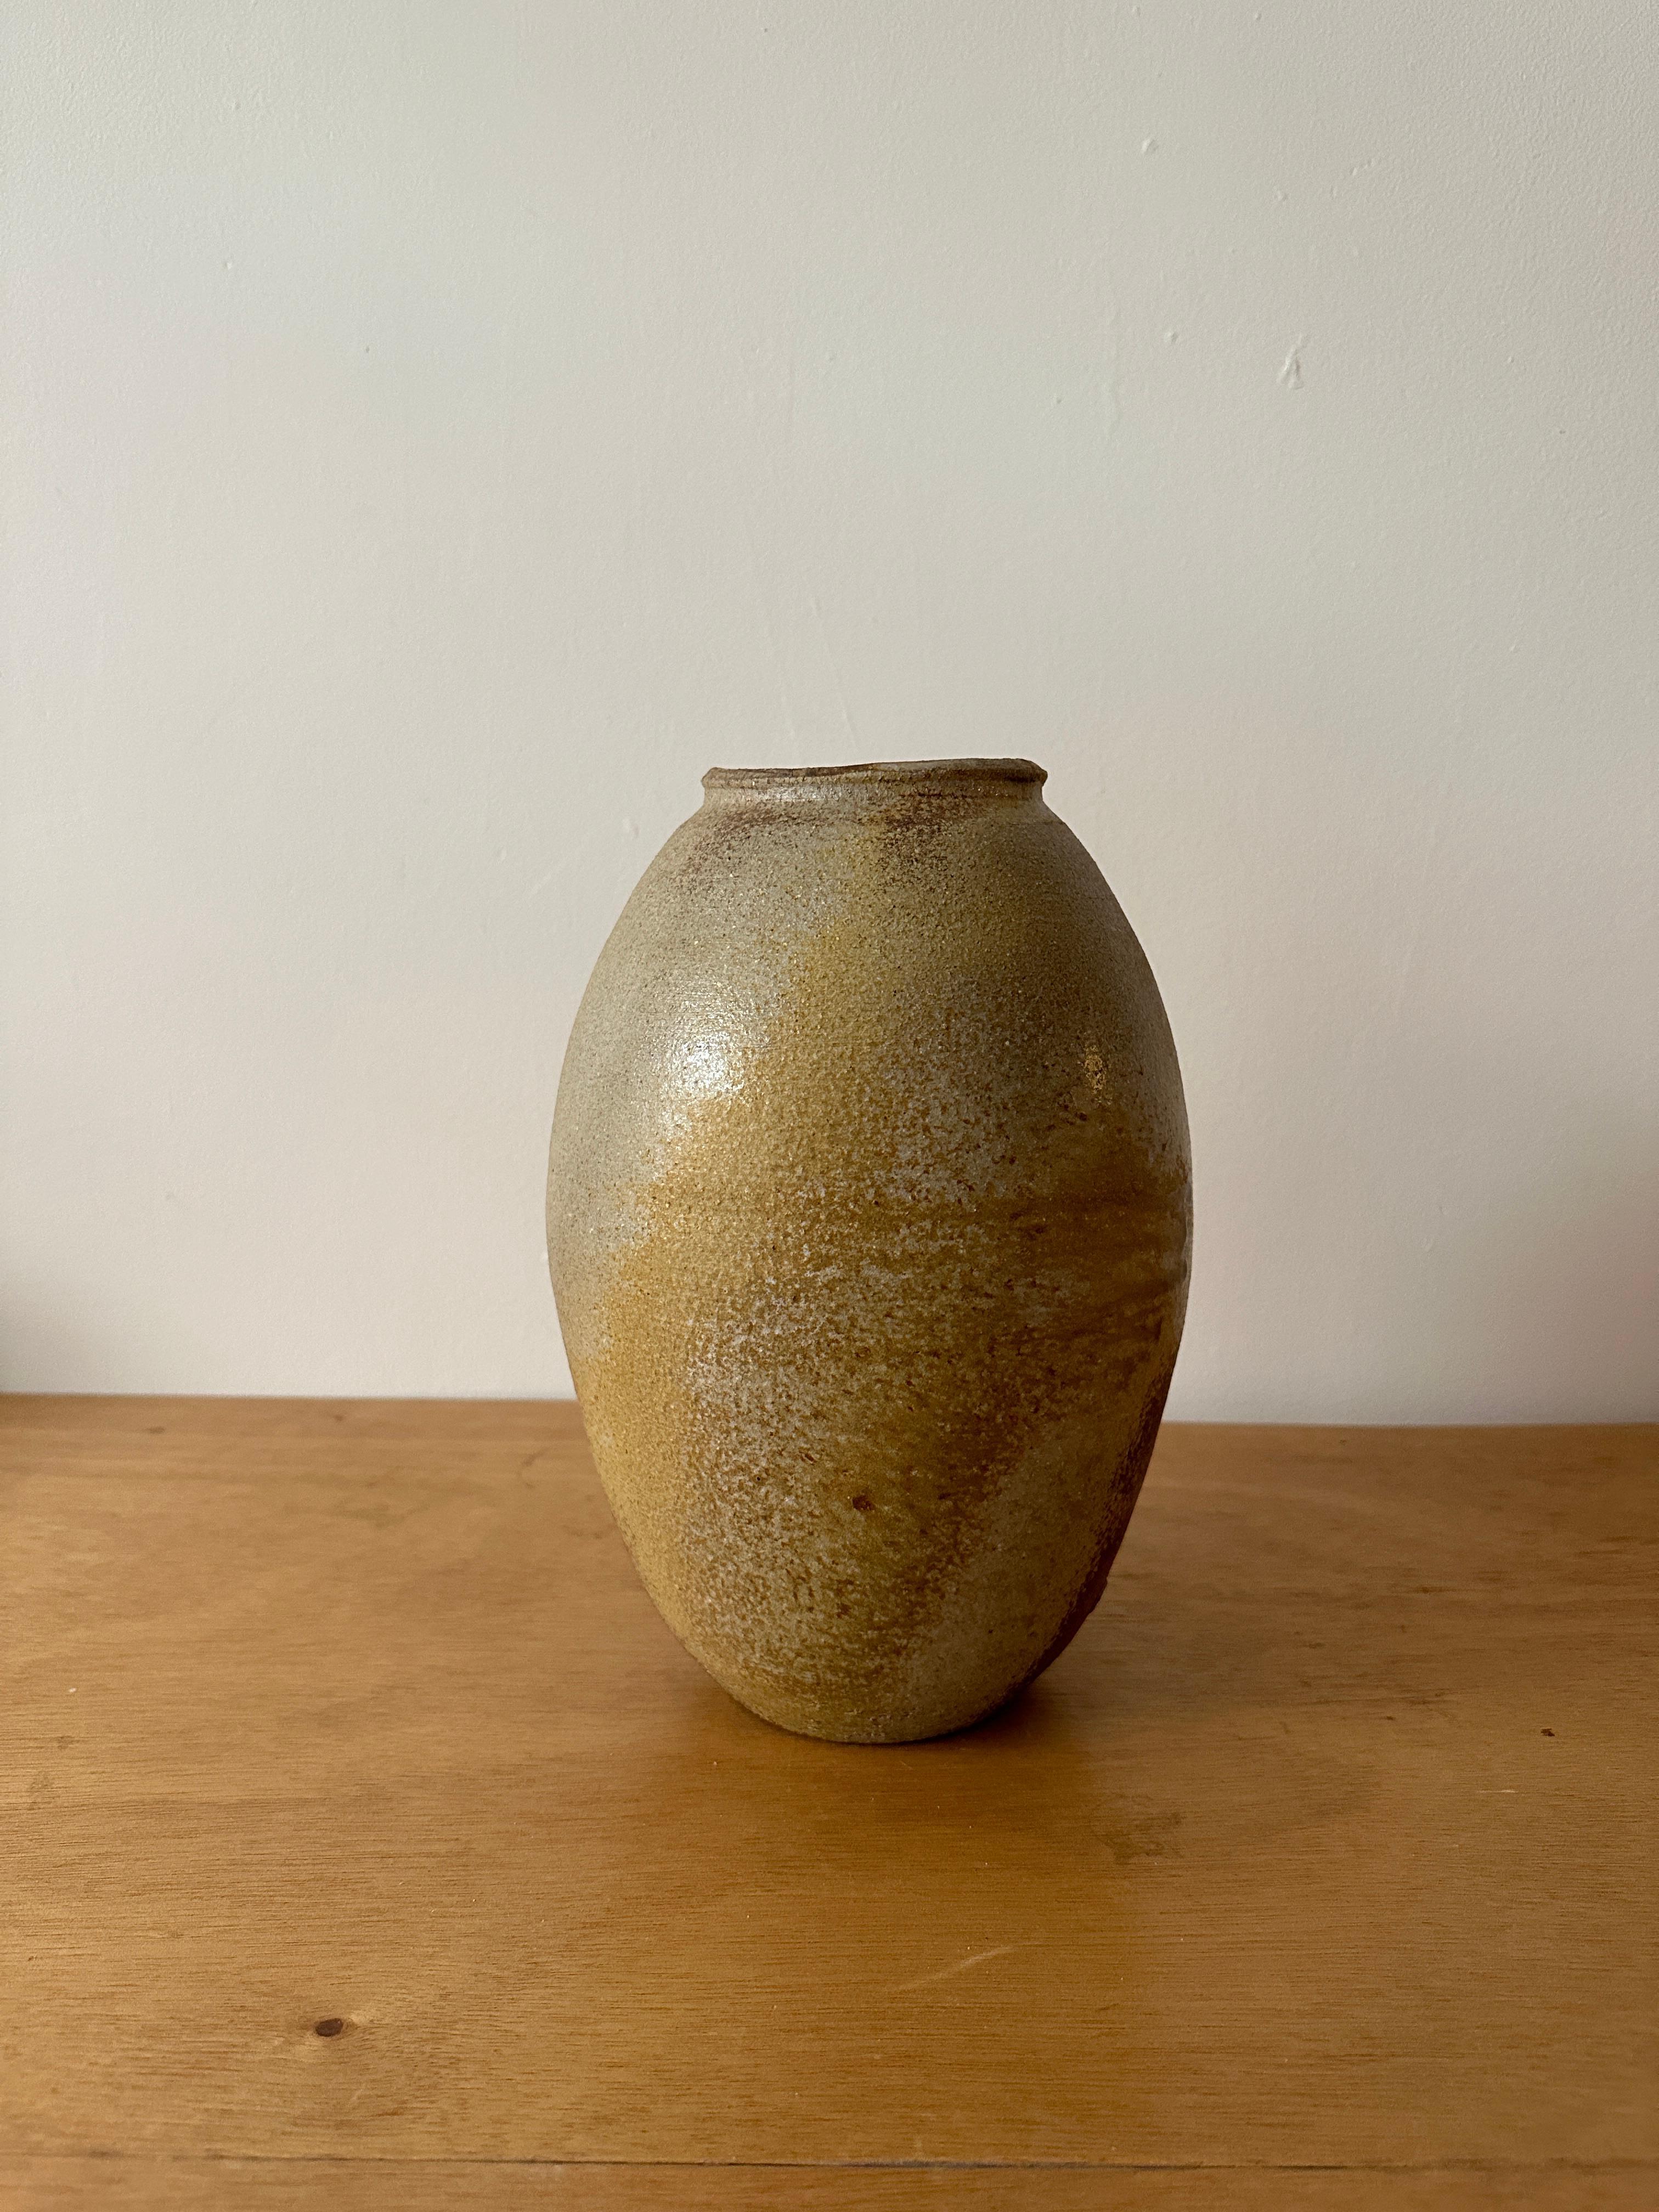 A wood-fired egg shaped ceramic vase with an expressive glaze complimenting the form and the material. 